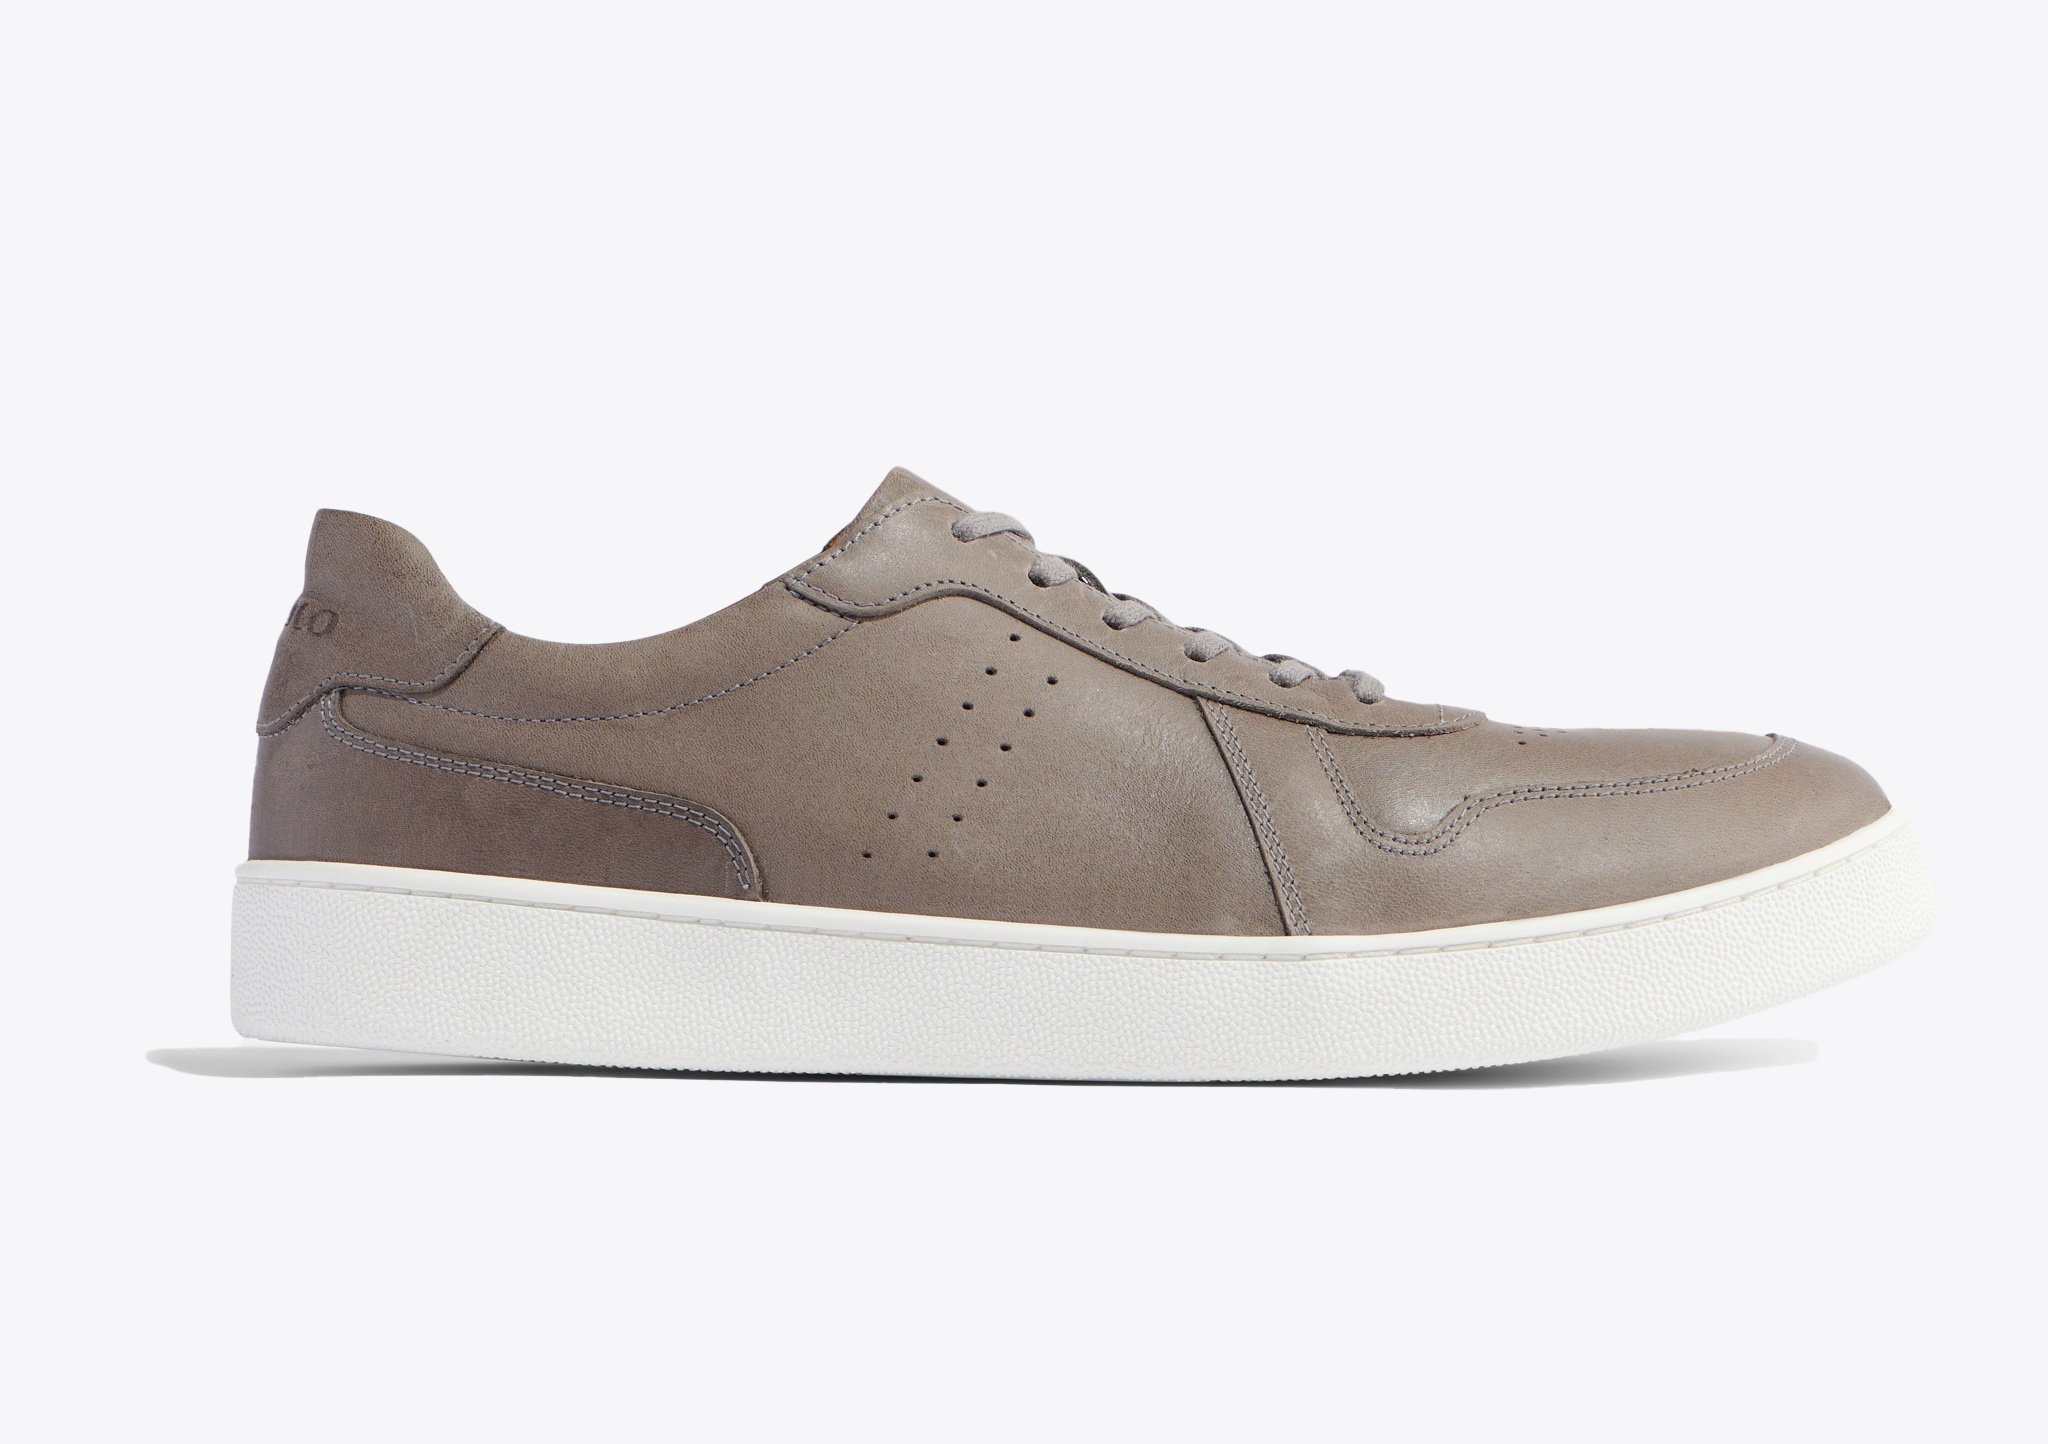 Nisolo Beto Go-To Court Sneaker Grey - Every Nisolo product is built on the foundation of comfort, function, and design. 